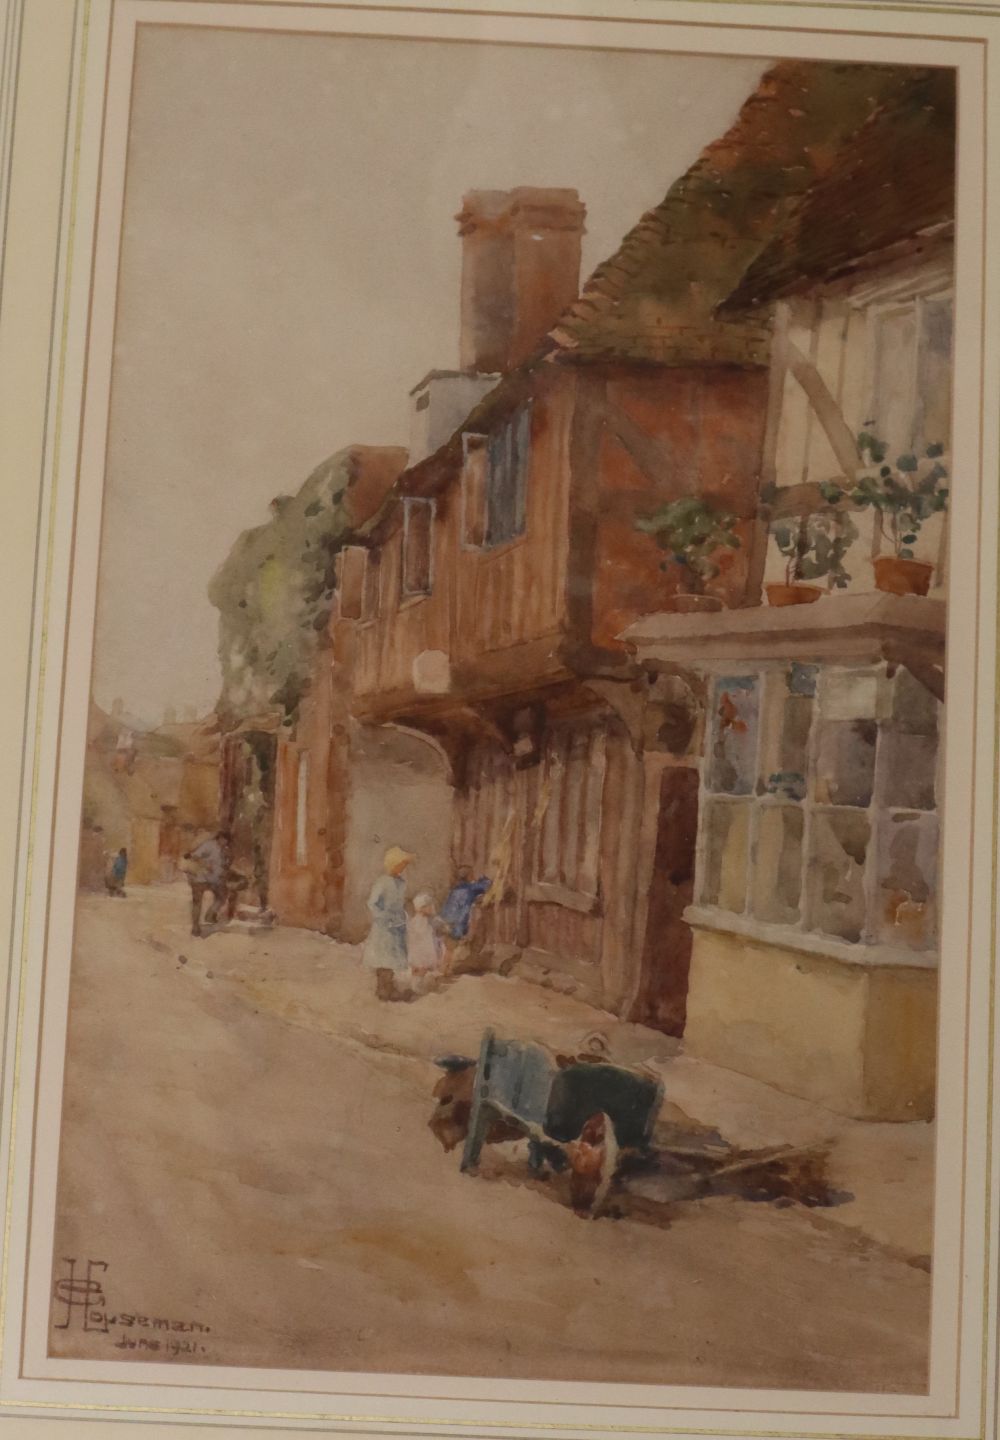 Edith Giffard Houseman (1875-), watercolour, Street scene with old cottage, signed and dated 1921, 33 x 21cm